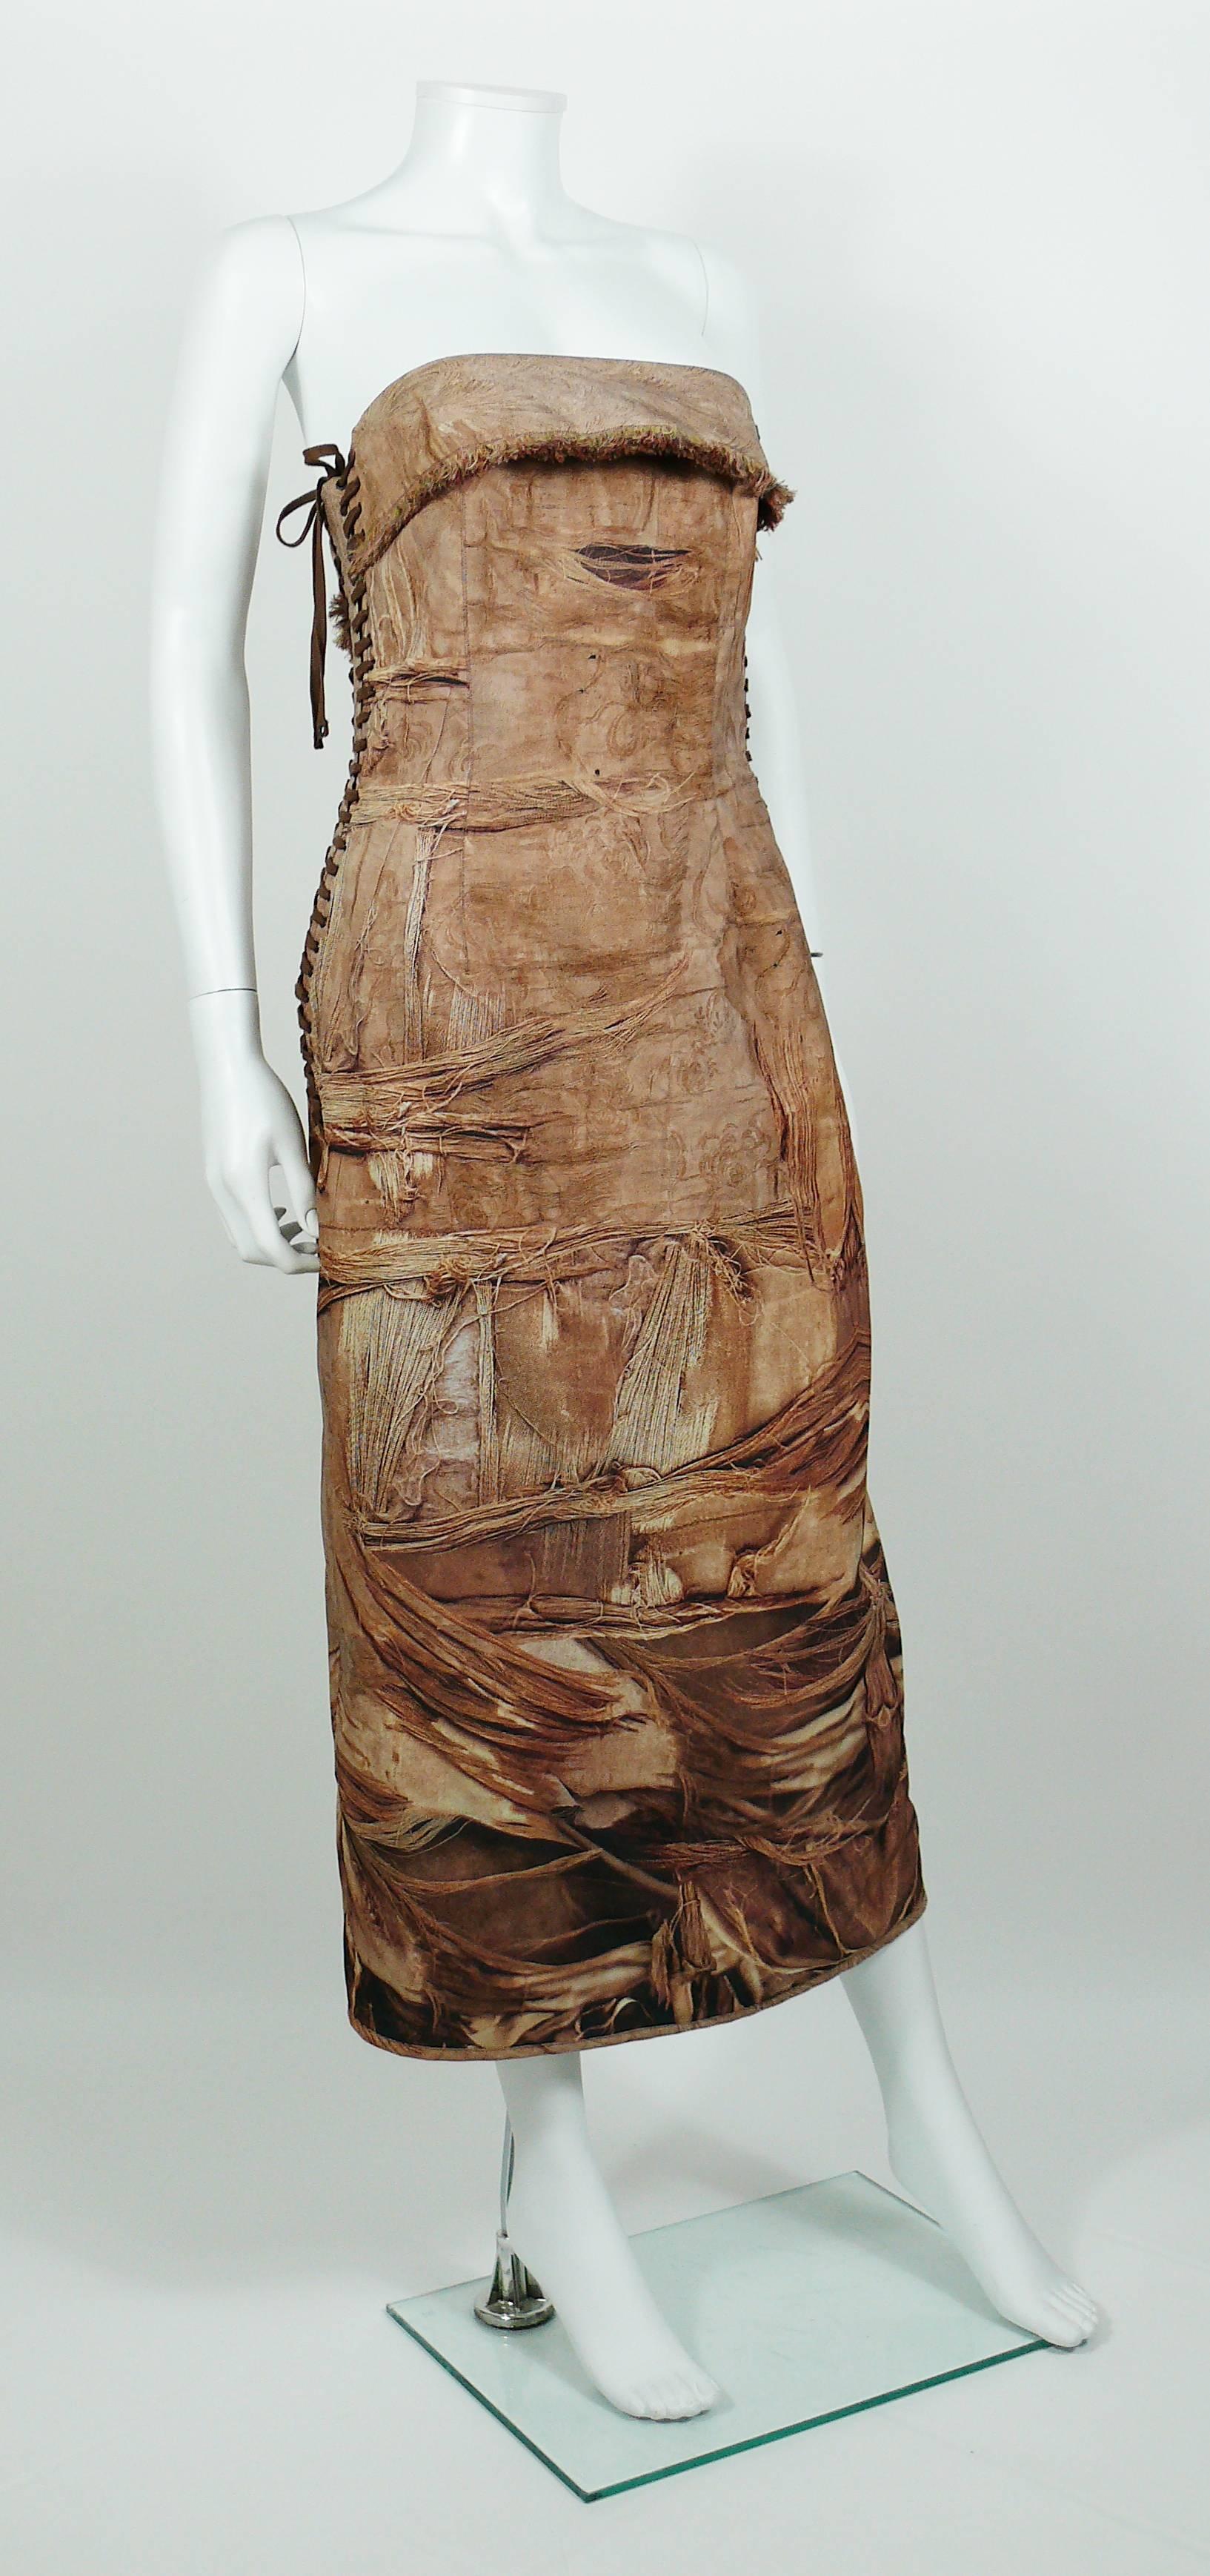 JEAN PAUL GAULTIER stunning bustier dress featuring a torn and stained antique fabric trompe l'oeil print.

This dress features :
- Boned chest.
- Lace detail on both sides.
- Passementerie trim on bustier.
- Slit on back.
- Zippered back closure.
-